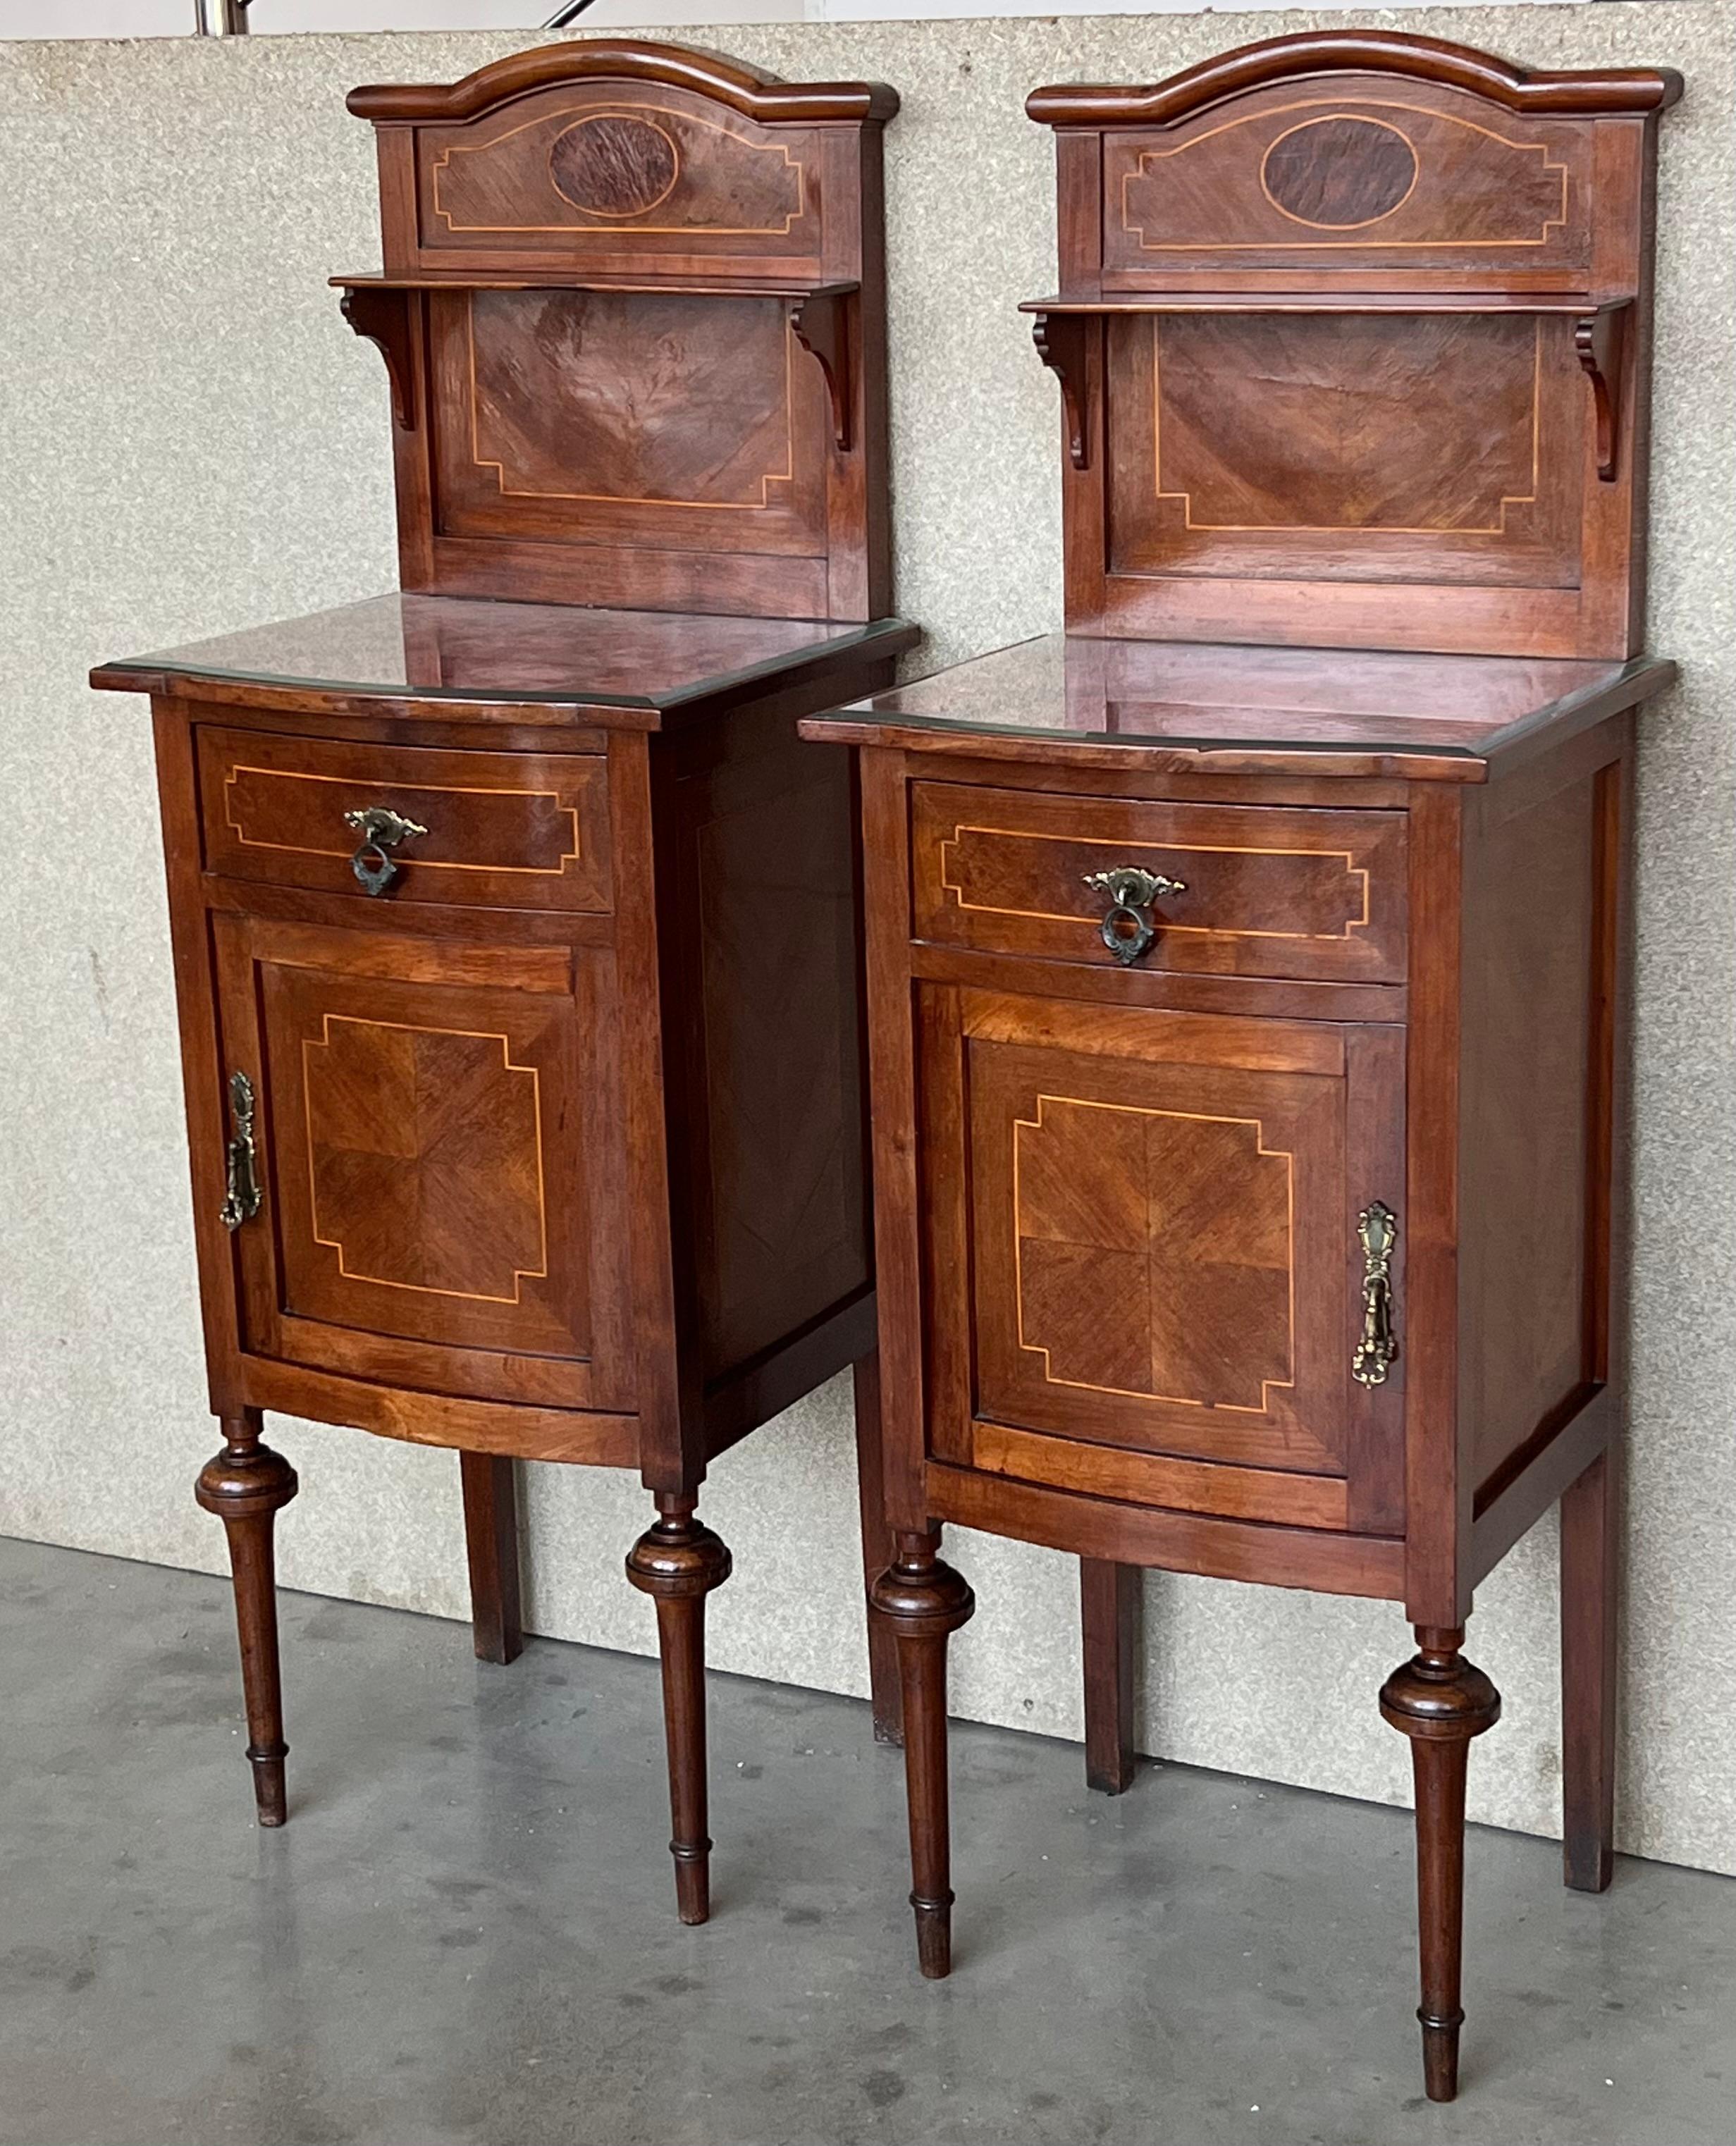 Louis XVI style pair of Marquetry nightstands with wood crest with shelveone drawer and one compartment.
Originals handles and garniture.
Completely restored.

Total height : 48 in
Height to the tabletop: 32.67 in.